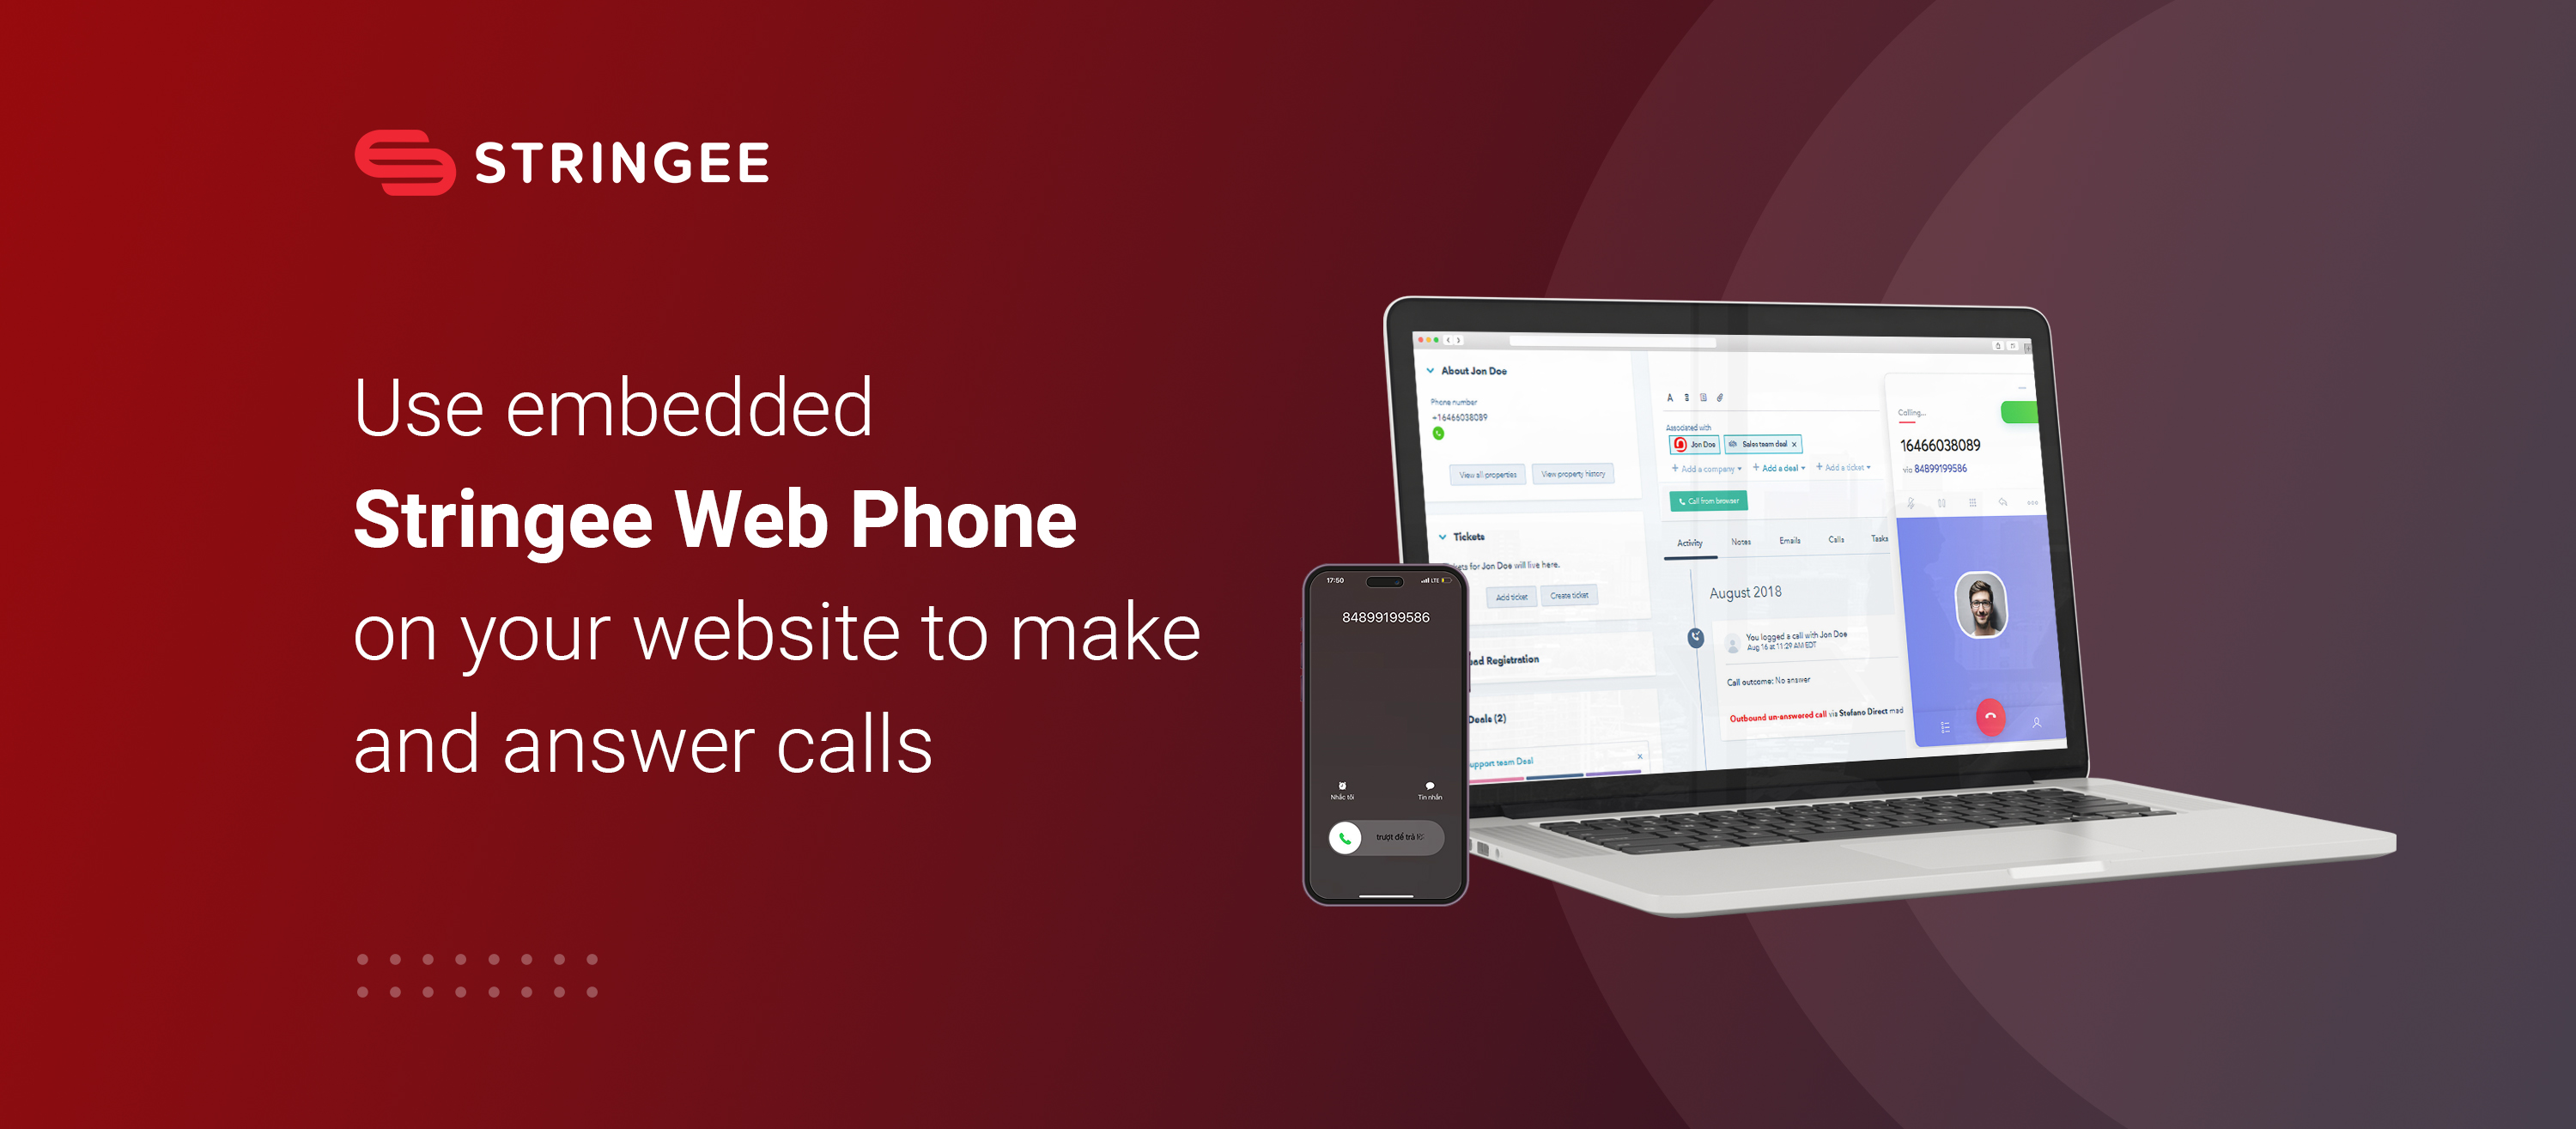 Use embedded Stringee Web Phone on your website to make and answer calls